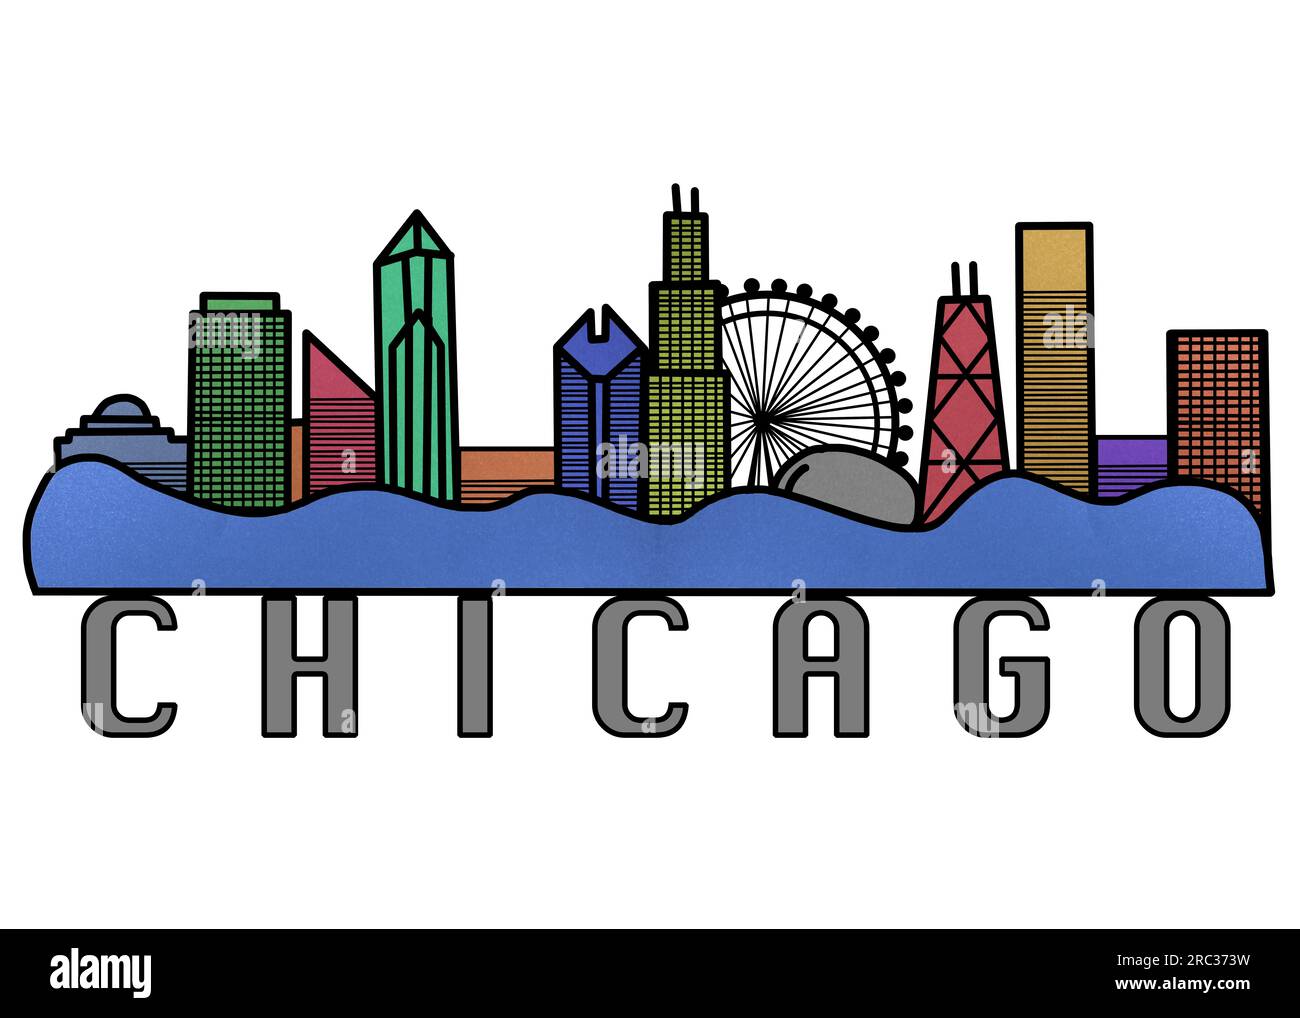 Chicago skyline Cut Out Stock Images & Pictures - Alamy